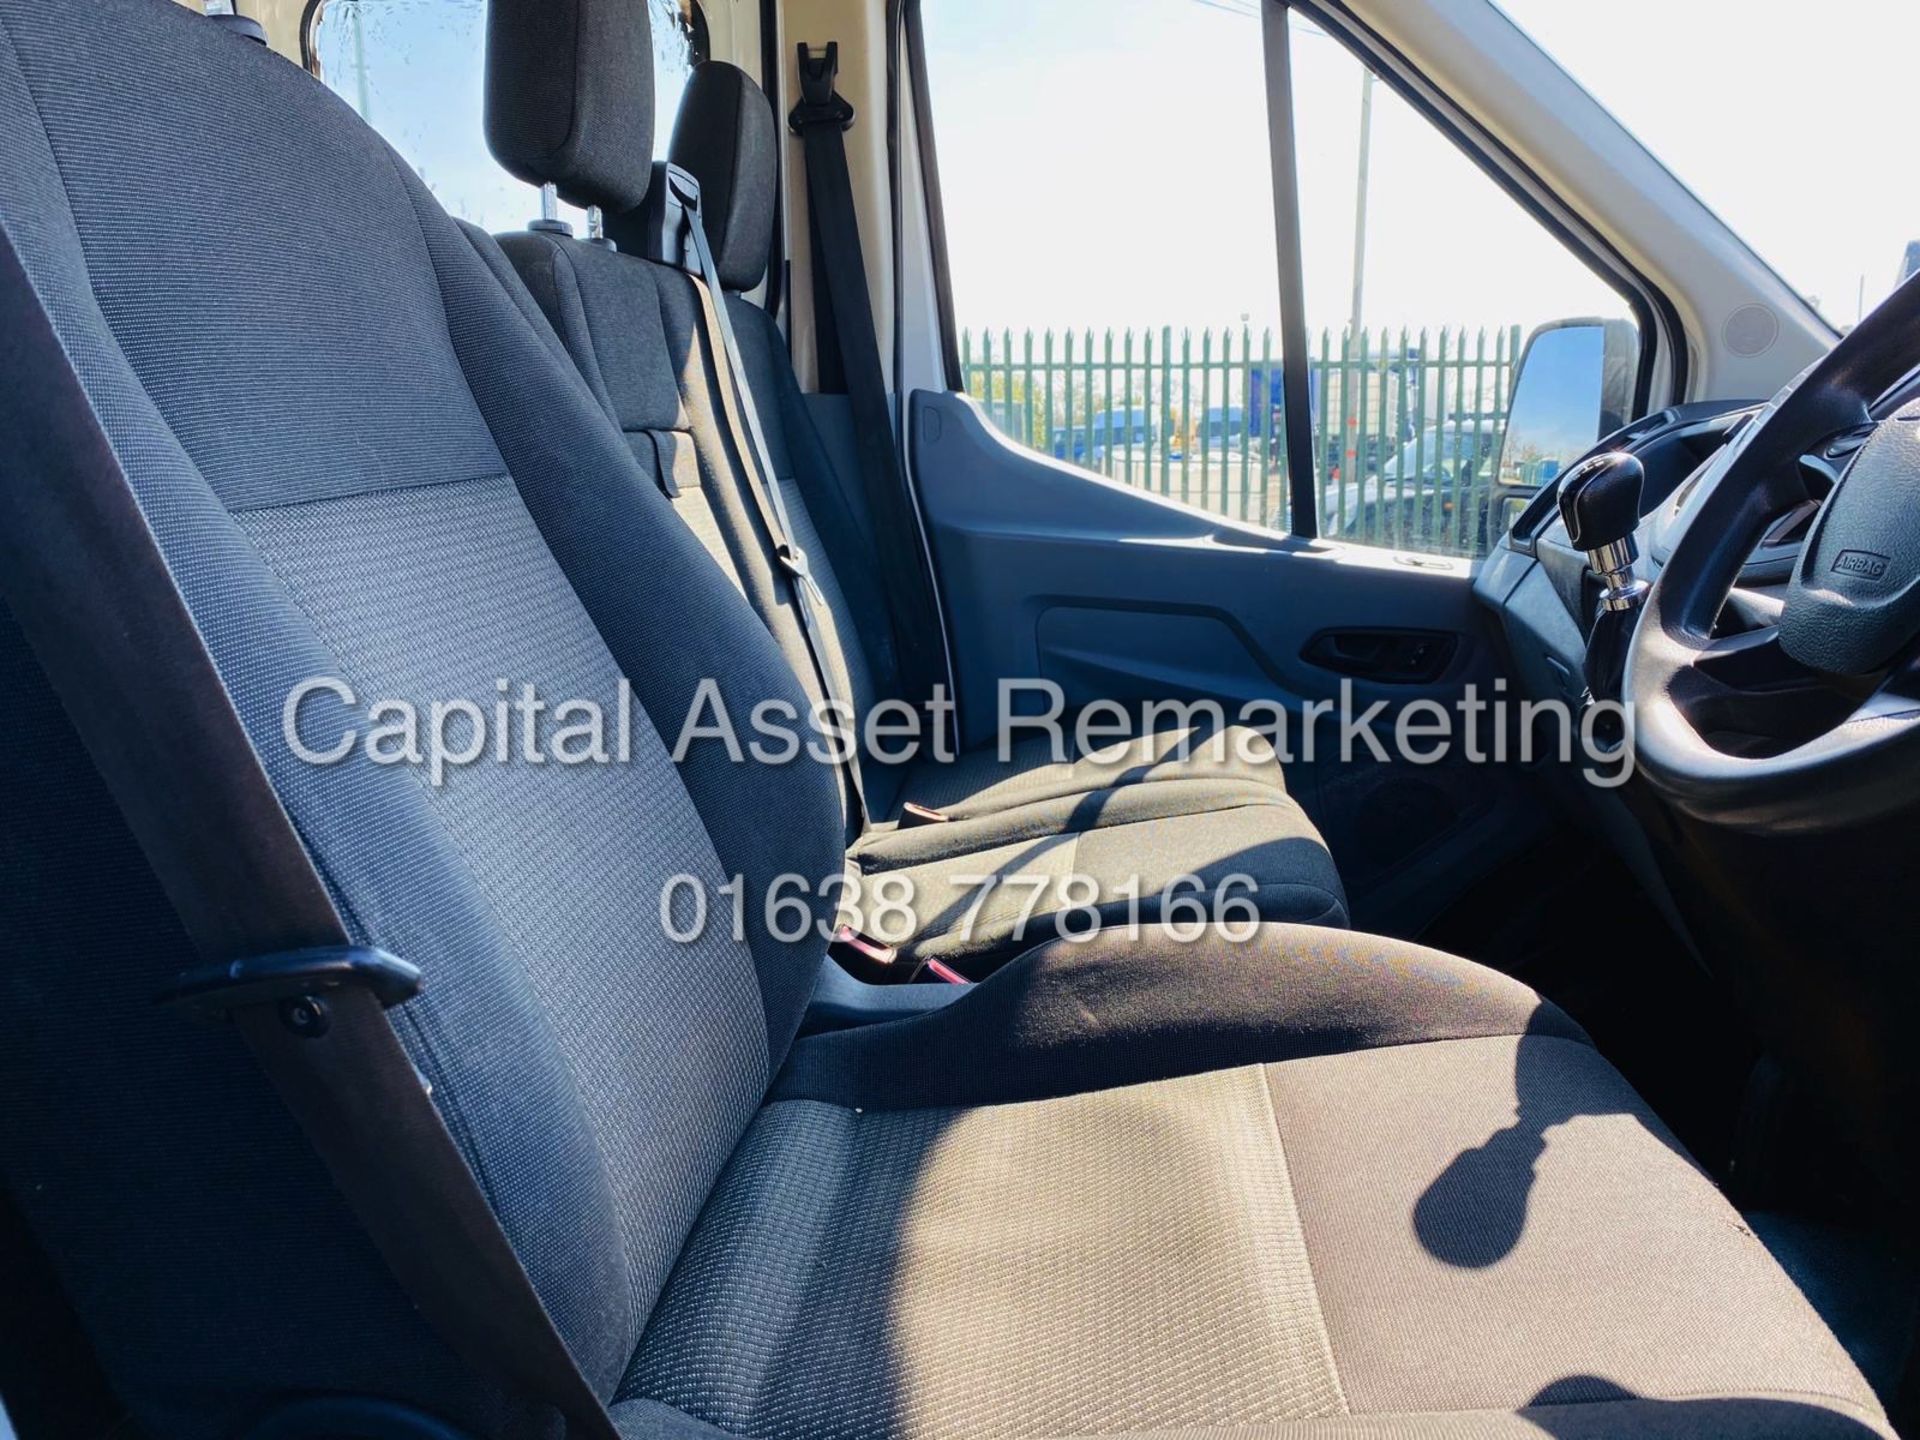 FORD TRANSIT 2.2TDCI "125PSI" TWIN REAR WHELL *TIPPER* (2017 MODEL) 1 OWNER FSH *EURO 6-ULEZ ACTIVE* - Image 15 of 23